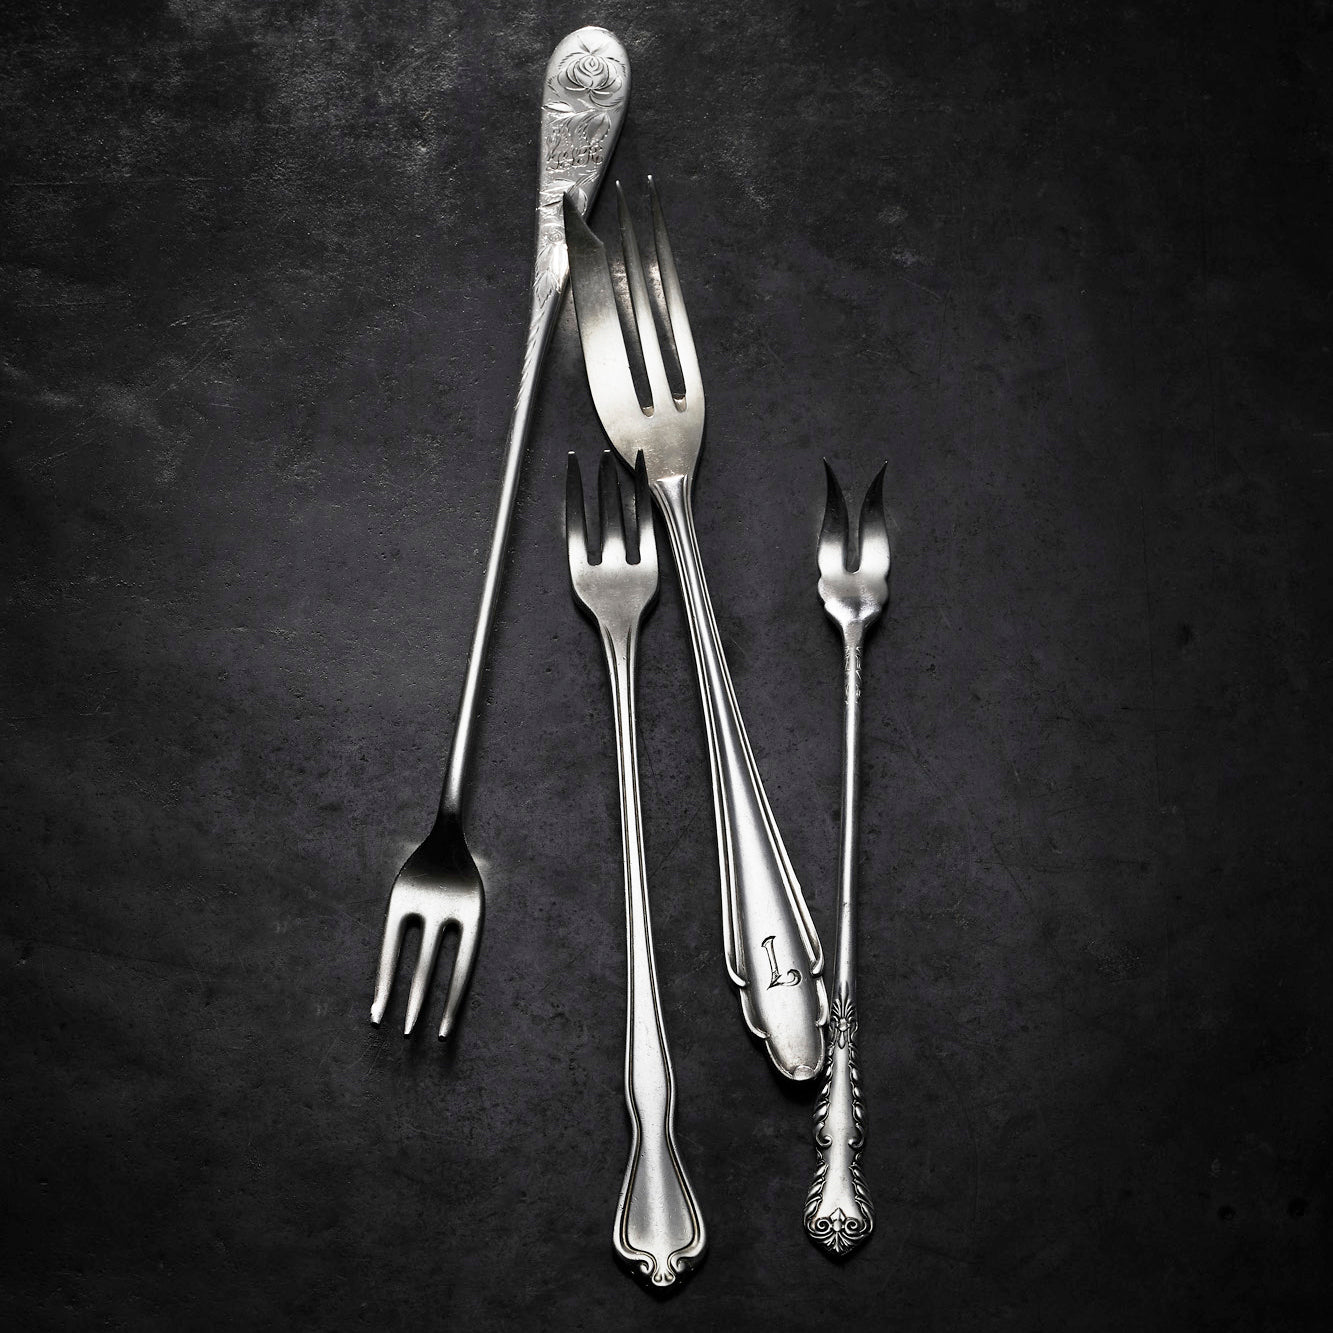 Vintage, silver-plated cocktail forks collected and restored by Caskata.